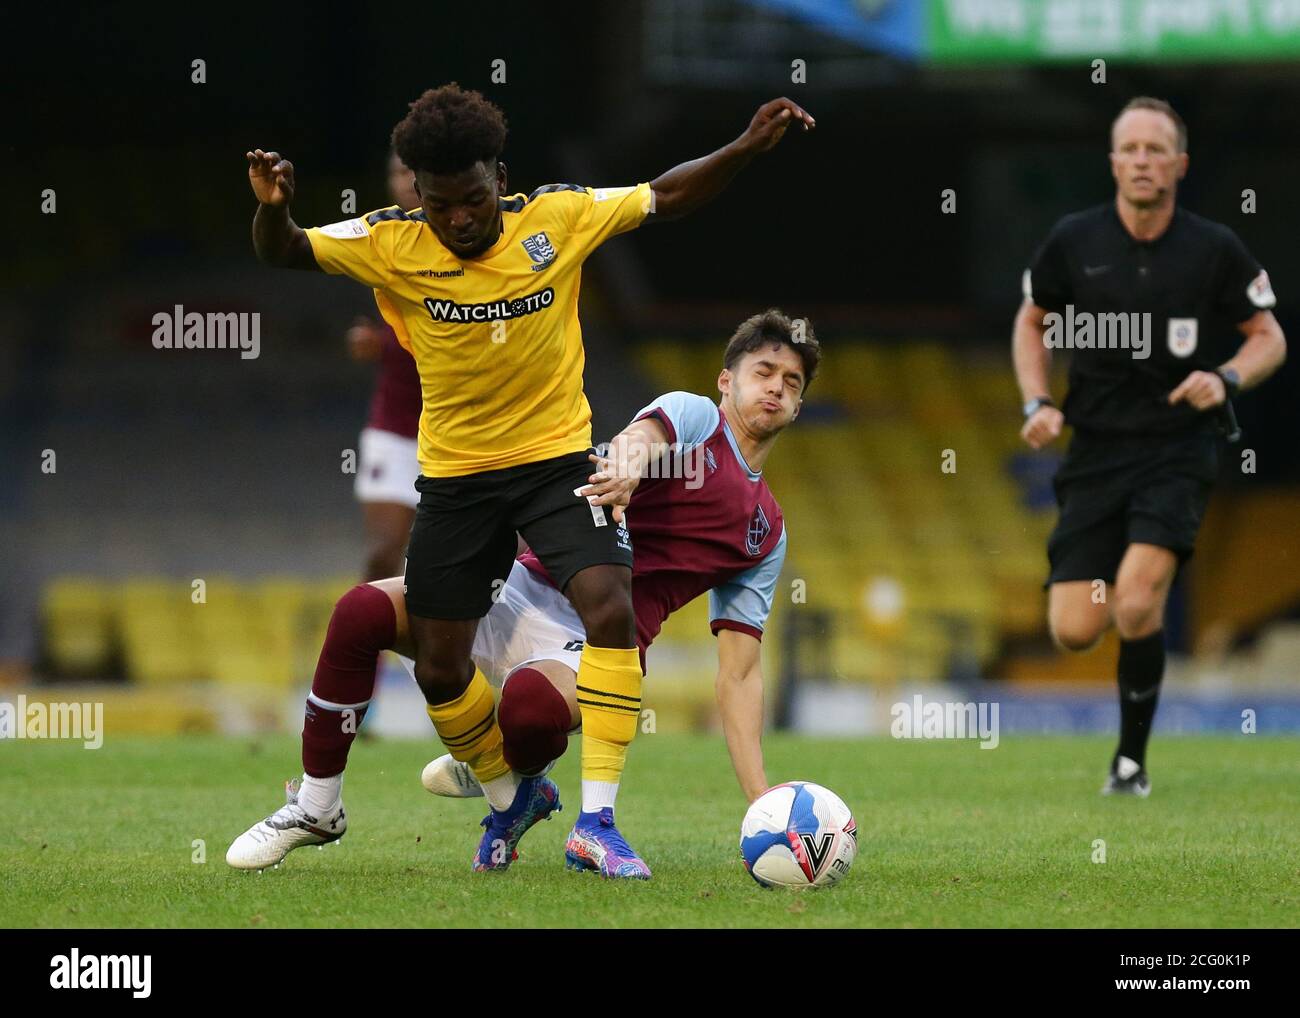 SOUTHEND ON SEA, ENGLAND. SEPTEMBER 8TH Terrell Egbri of Southend United battling for possession with Bernado Rosa of West Ham United during the EFL Trophy match between Southend United and West Ham United at Roots Hall, Southend. (Credit: Jacques Feeney | MI News) Credit: MI News & Sport /Alamy Live News Stock Photo